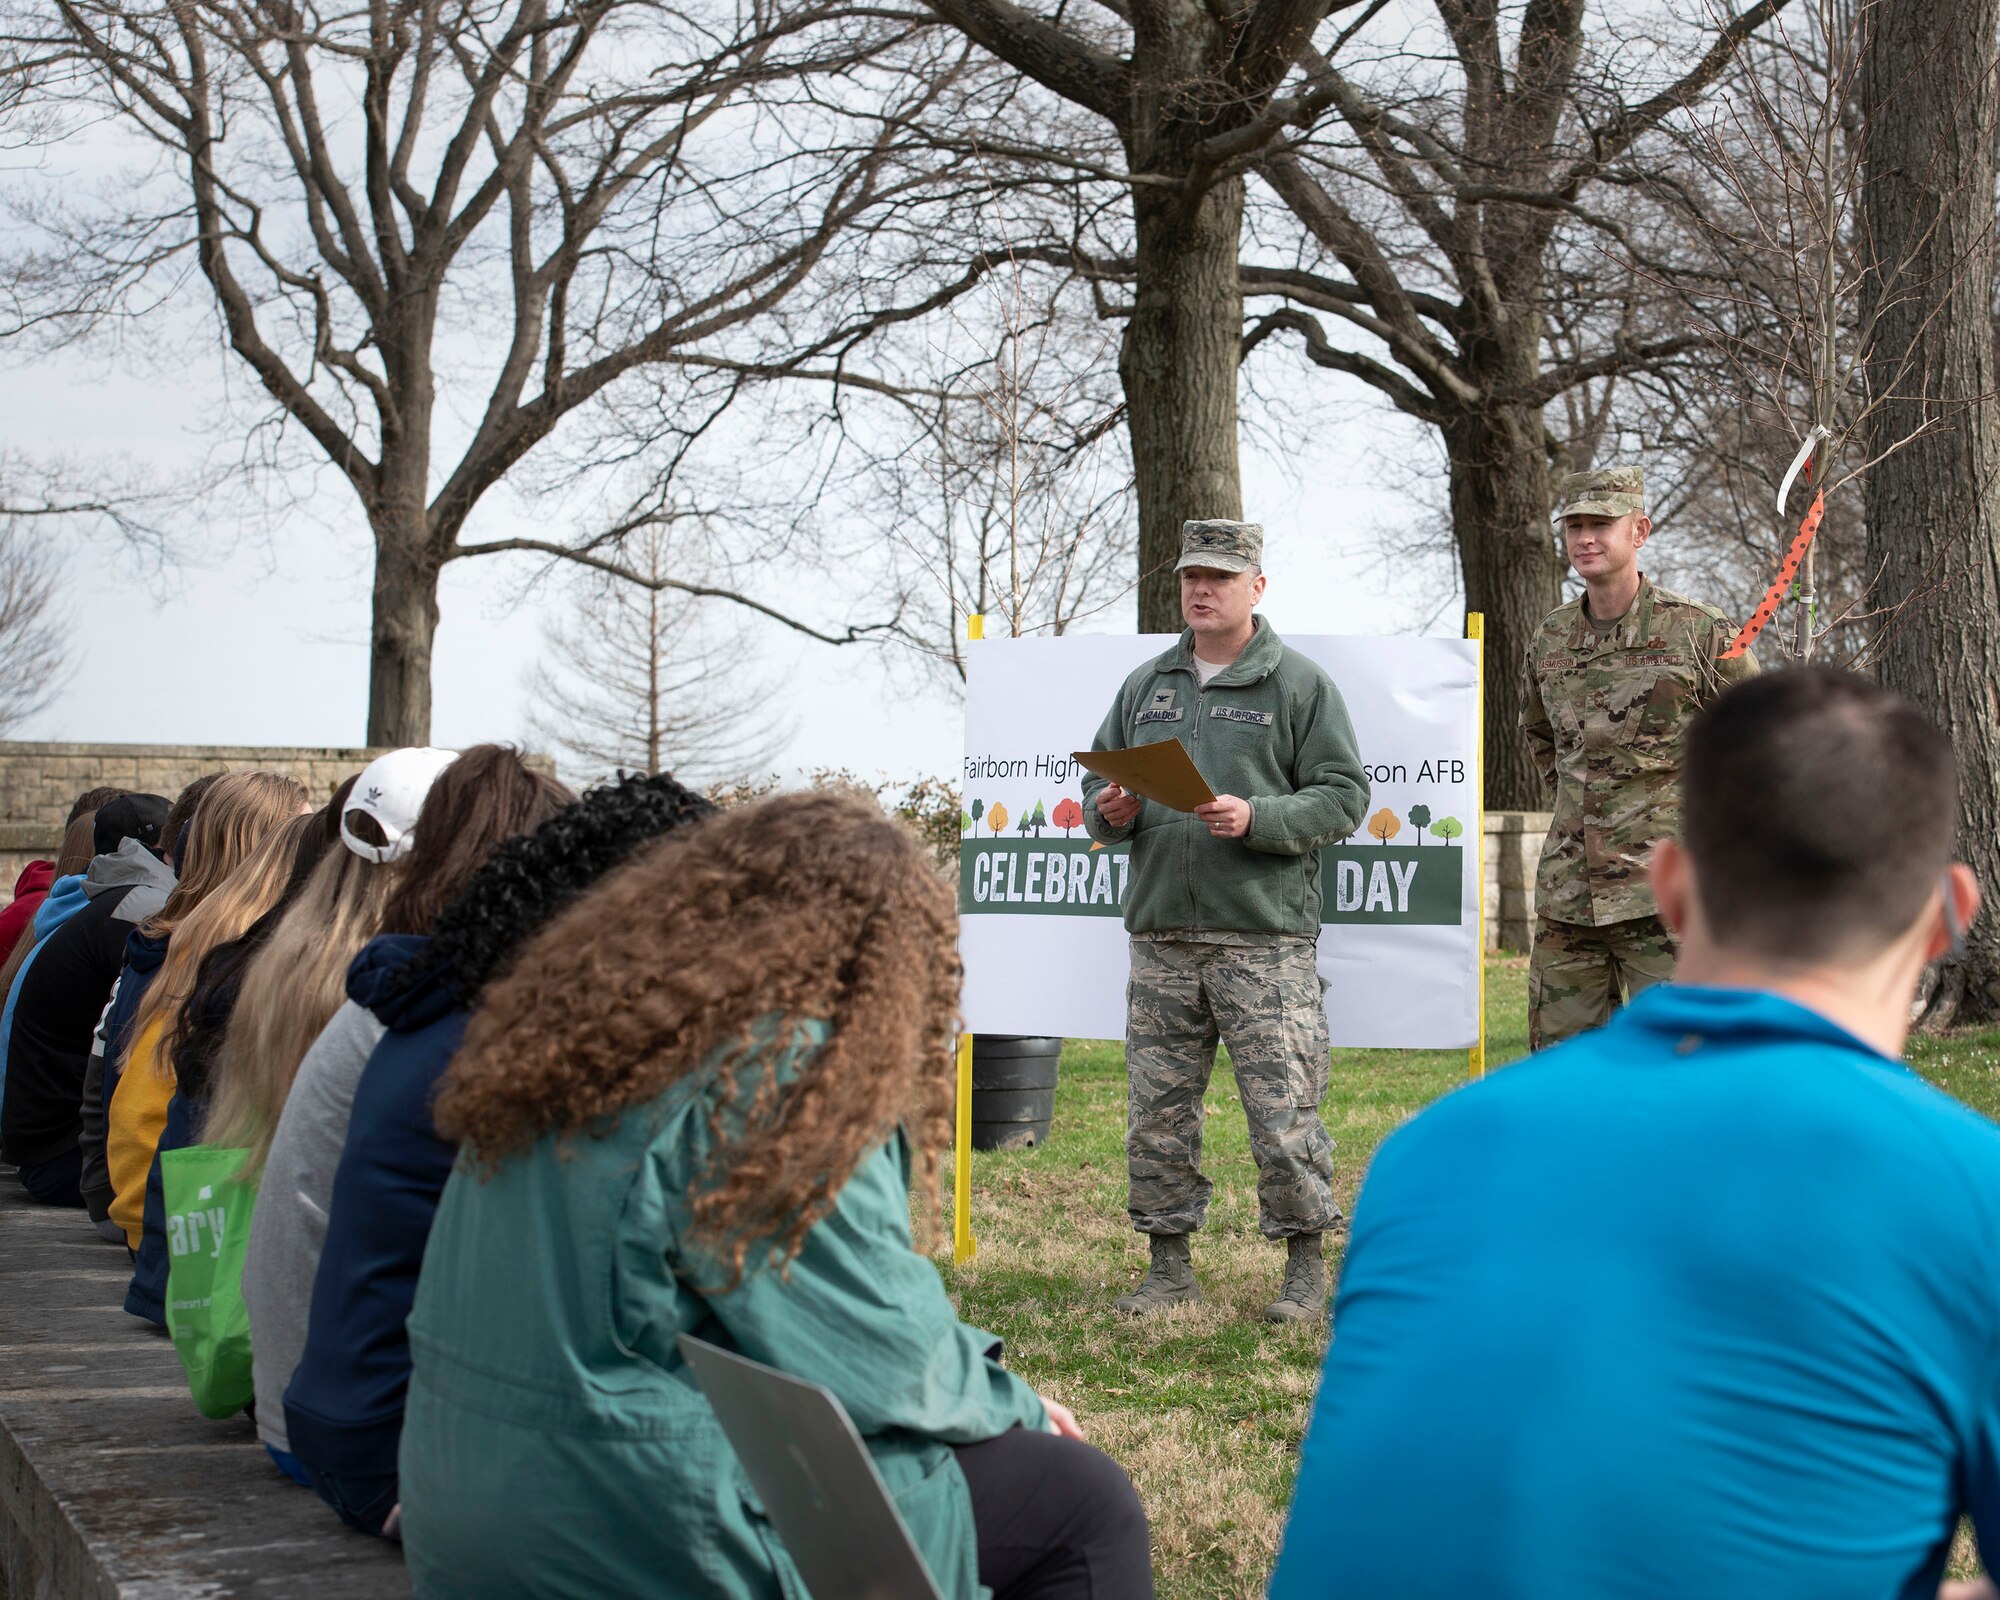 Col. David Anzaldua, 88th Air Base Wing vice commander, reads the Arbor Day proclamation to Fairborn High School environmental advanced placement students on the grounds near the Wright Brothers Memorial, Dayton, Ohio, April 11, 2019. The students participated in Arbor Day activities, including planting a total of 26 trees to support efforts for protecting trees and woodlands. (U.S. Air Force photo by Michelle Gigante)